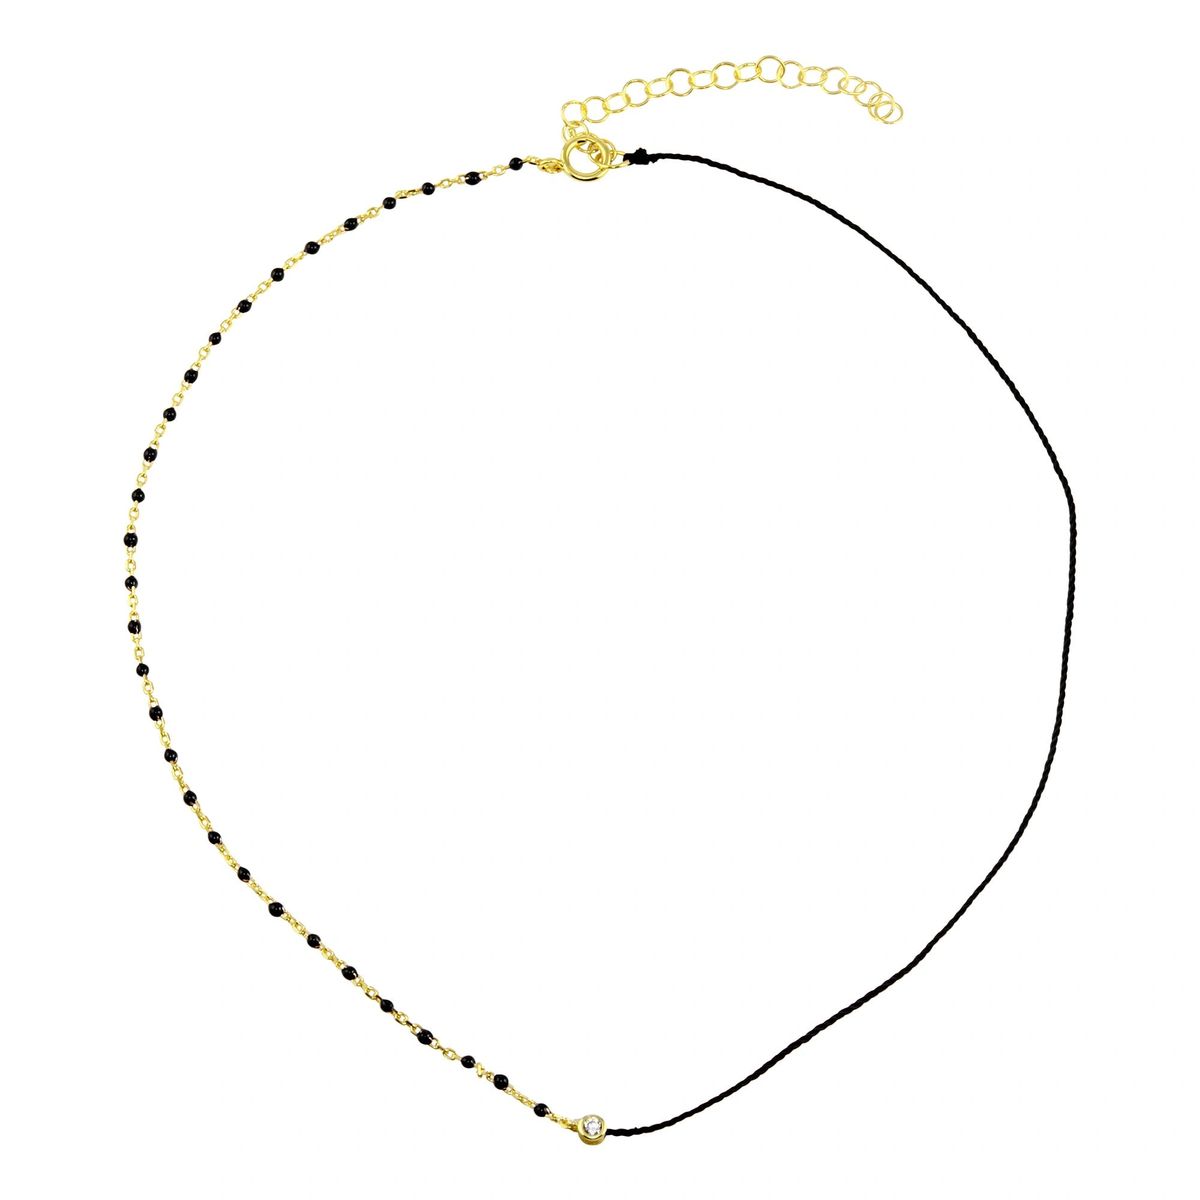 Cotton Cord with beaded Black Chain Necklace